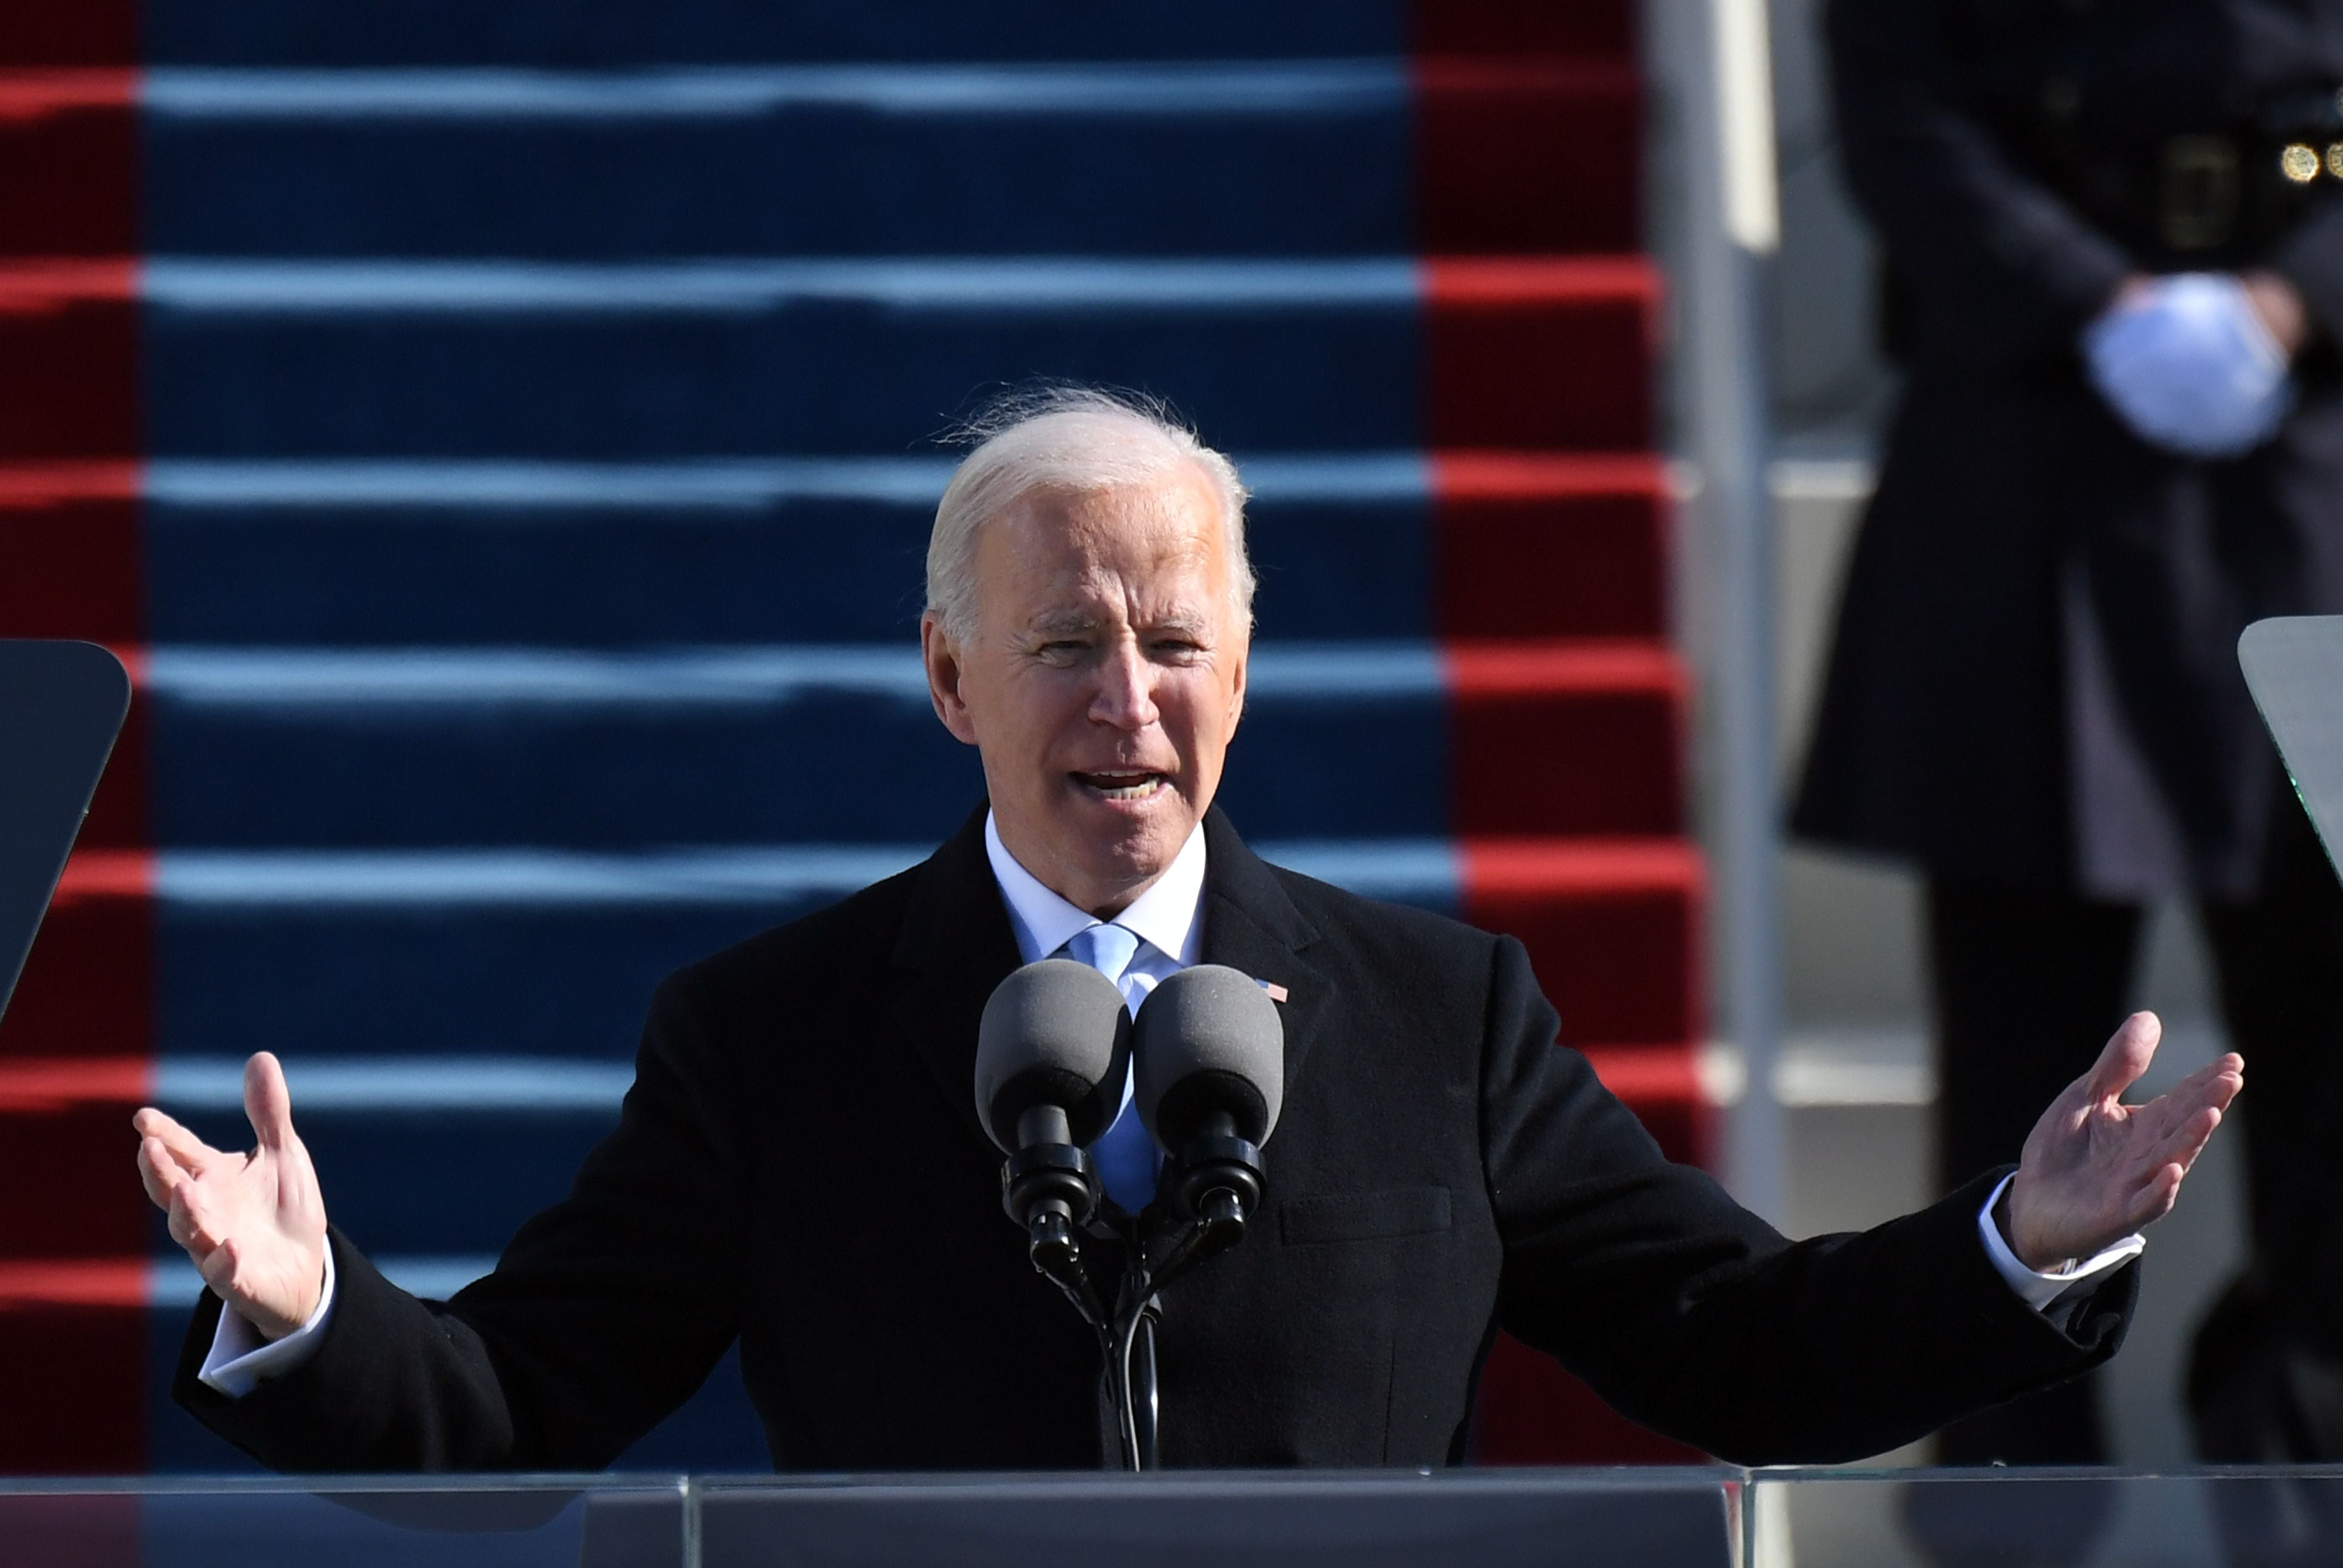 Joe Biden on inauguration day, when he sought unity across the political divide